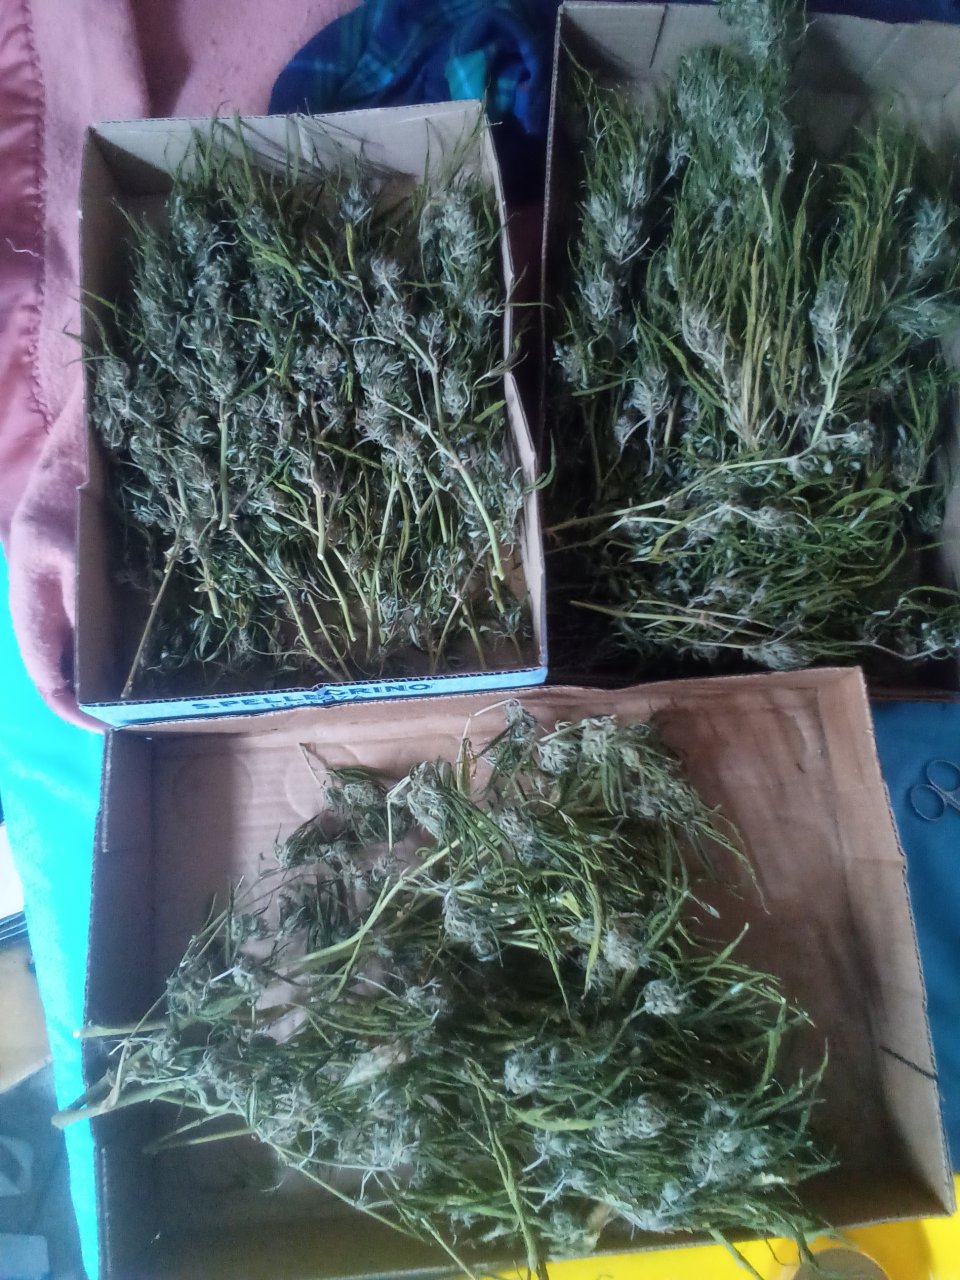 Harvested and dry enough for trimming